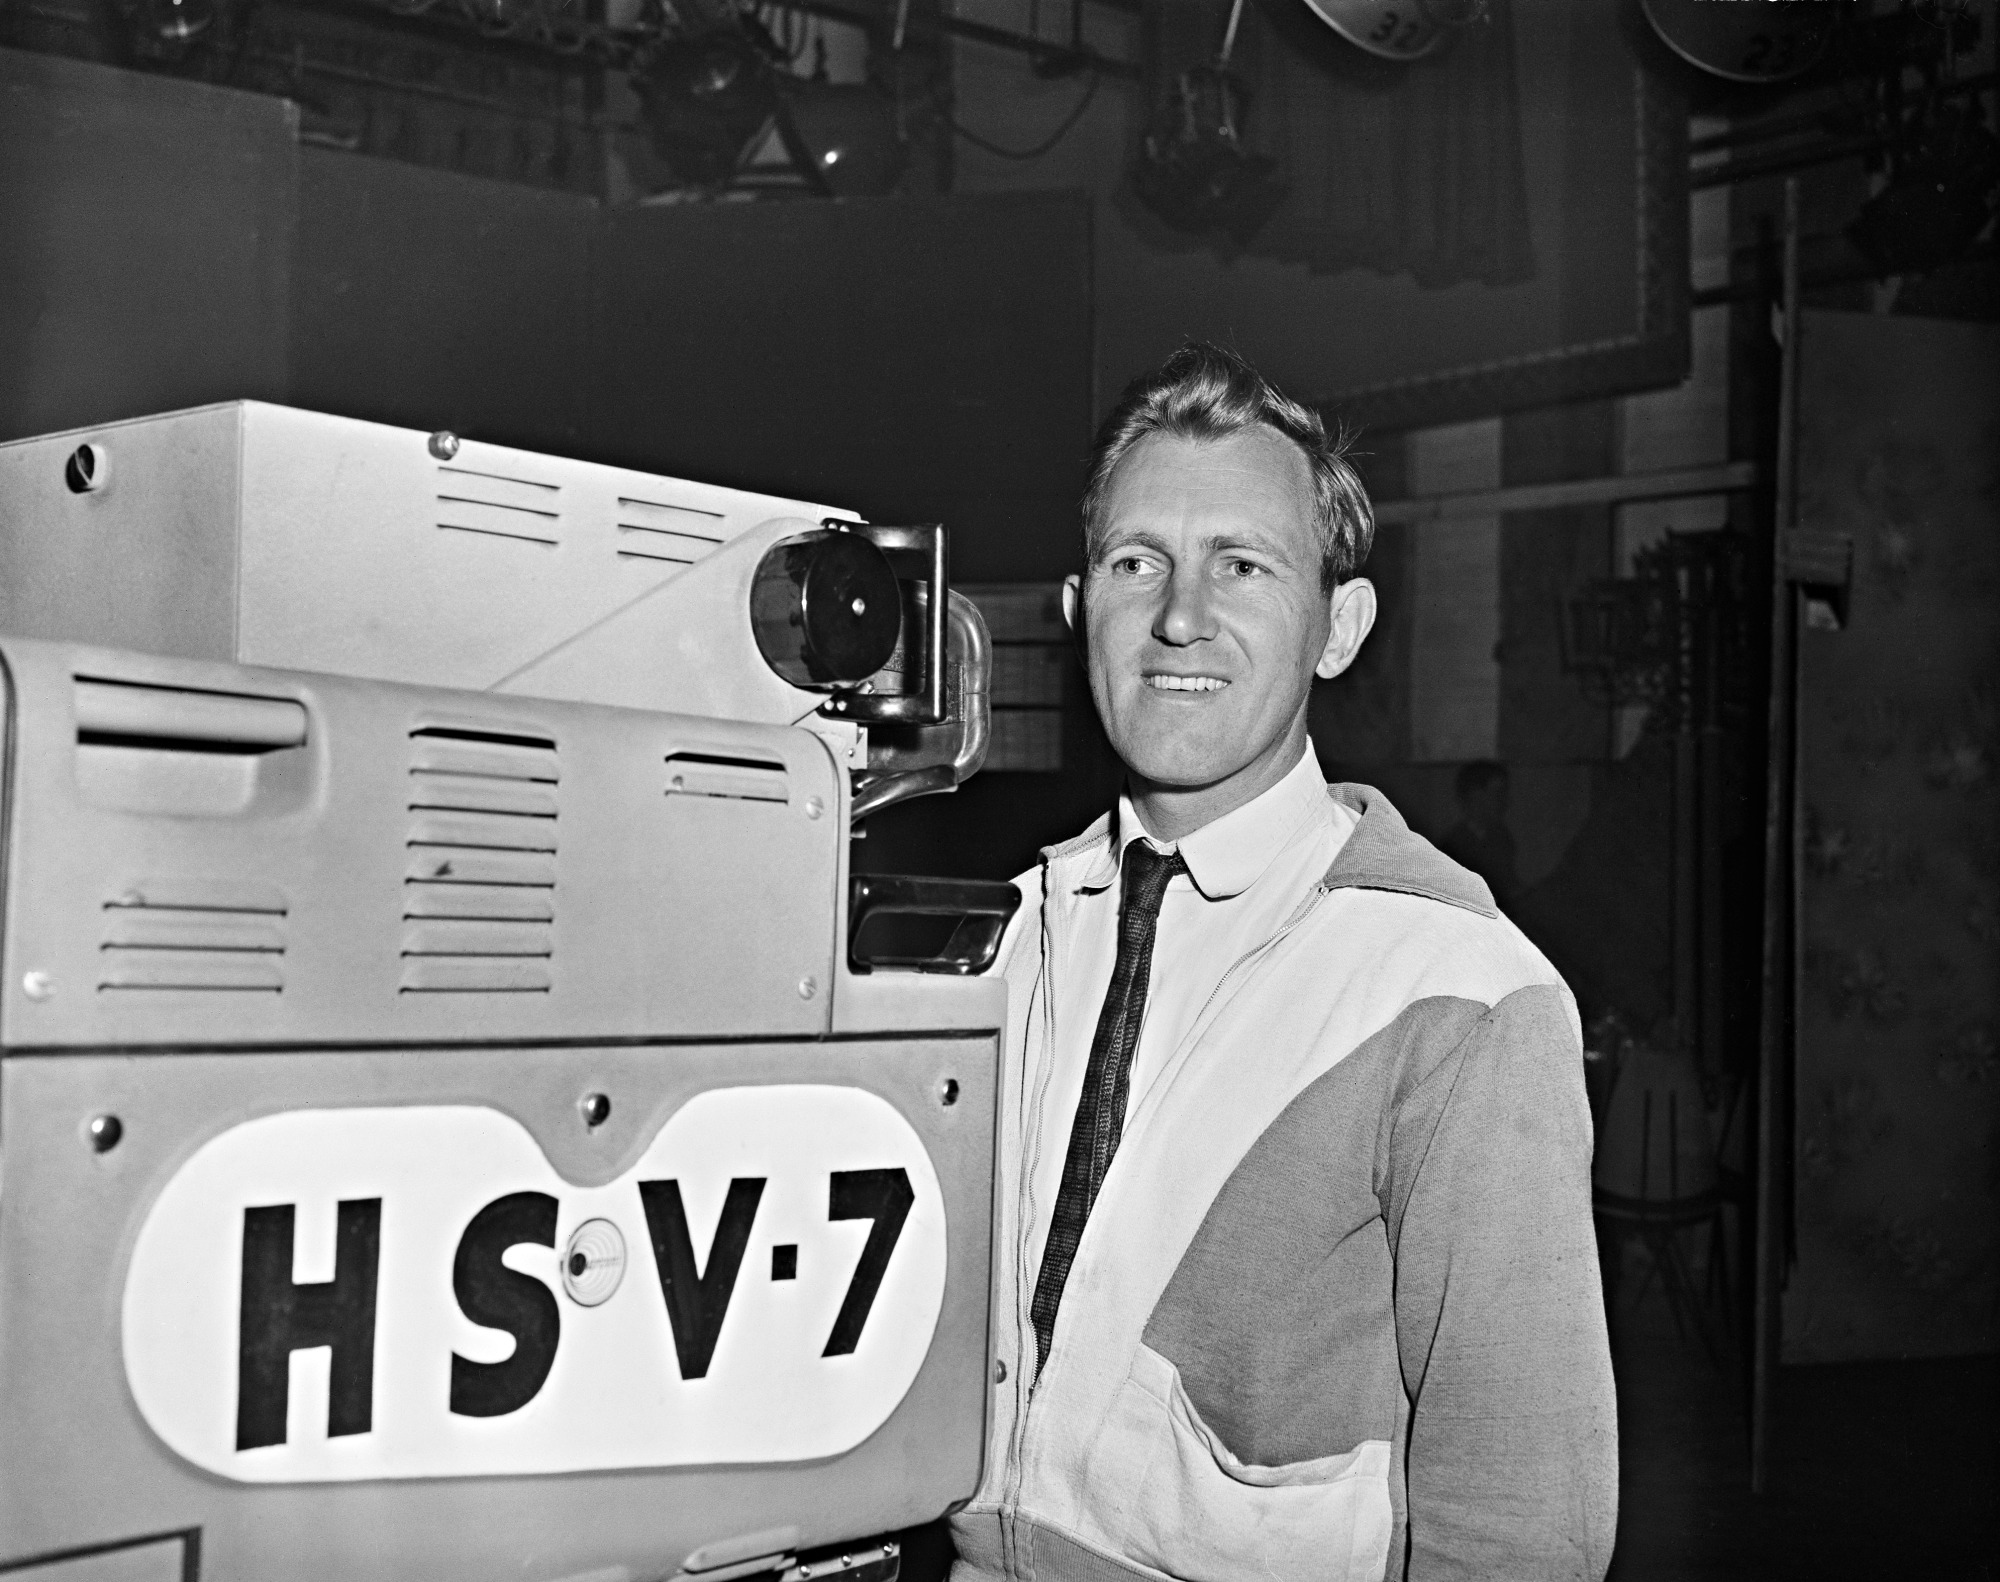 Media - National Archives of Australia: A12111, 1/1958/16/89